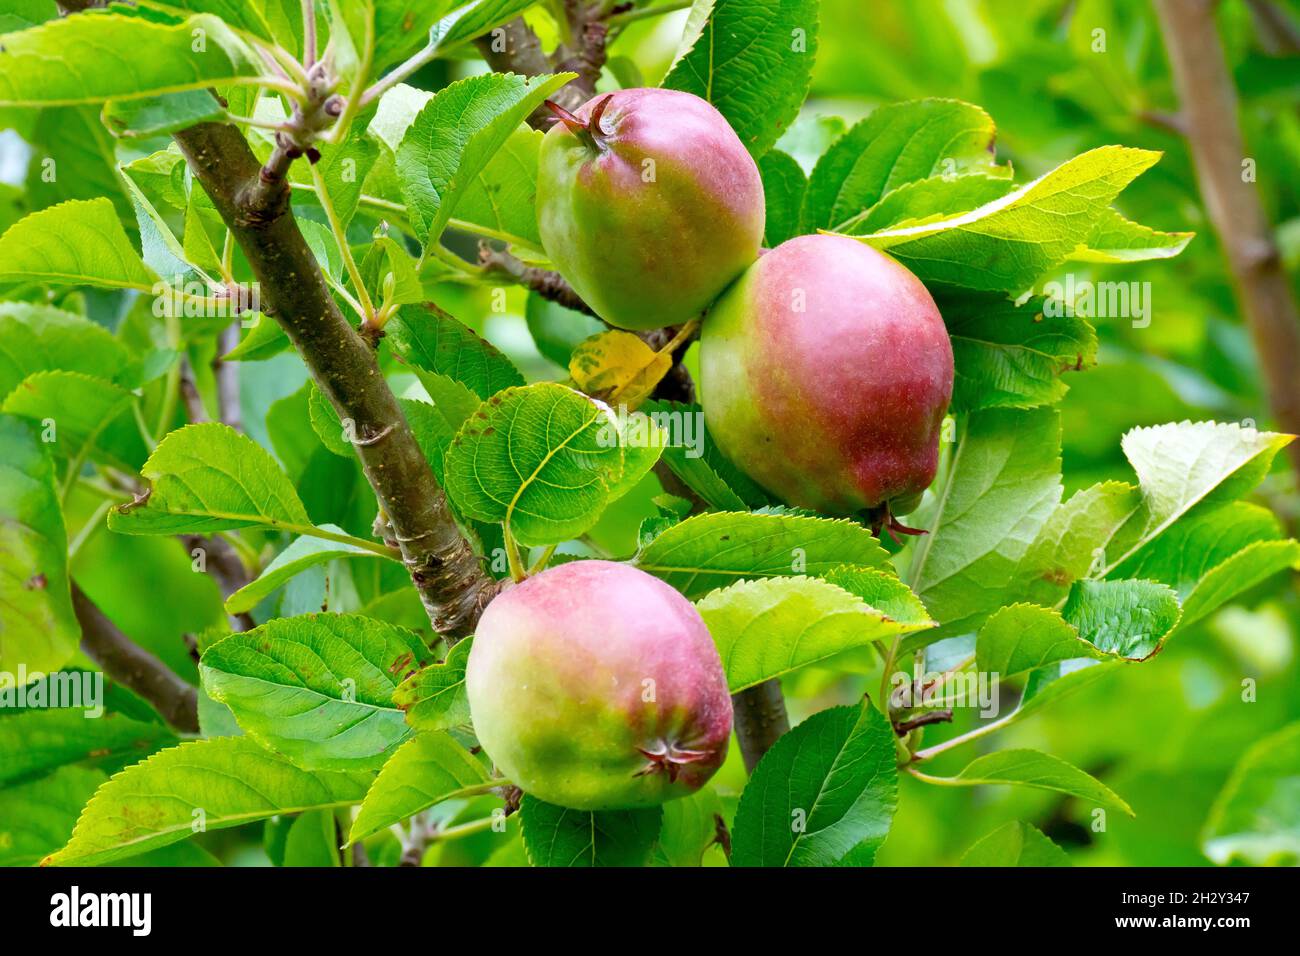 Crab Apple (malus sylvestris), close up of a group of large red apples hanging from the branches of a tree. Stock Photo